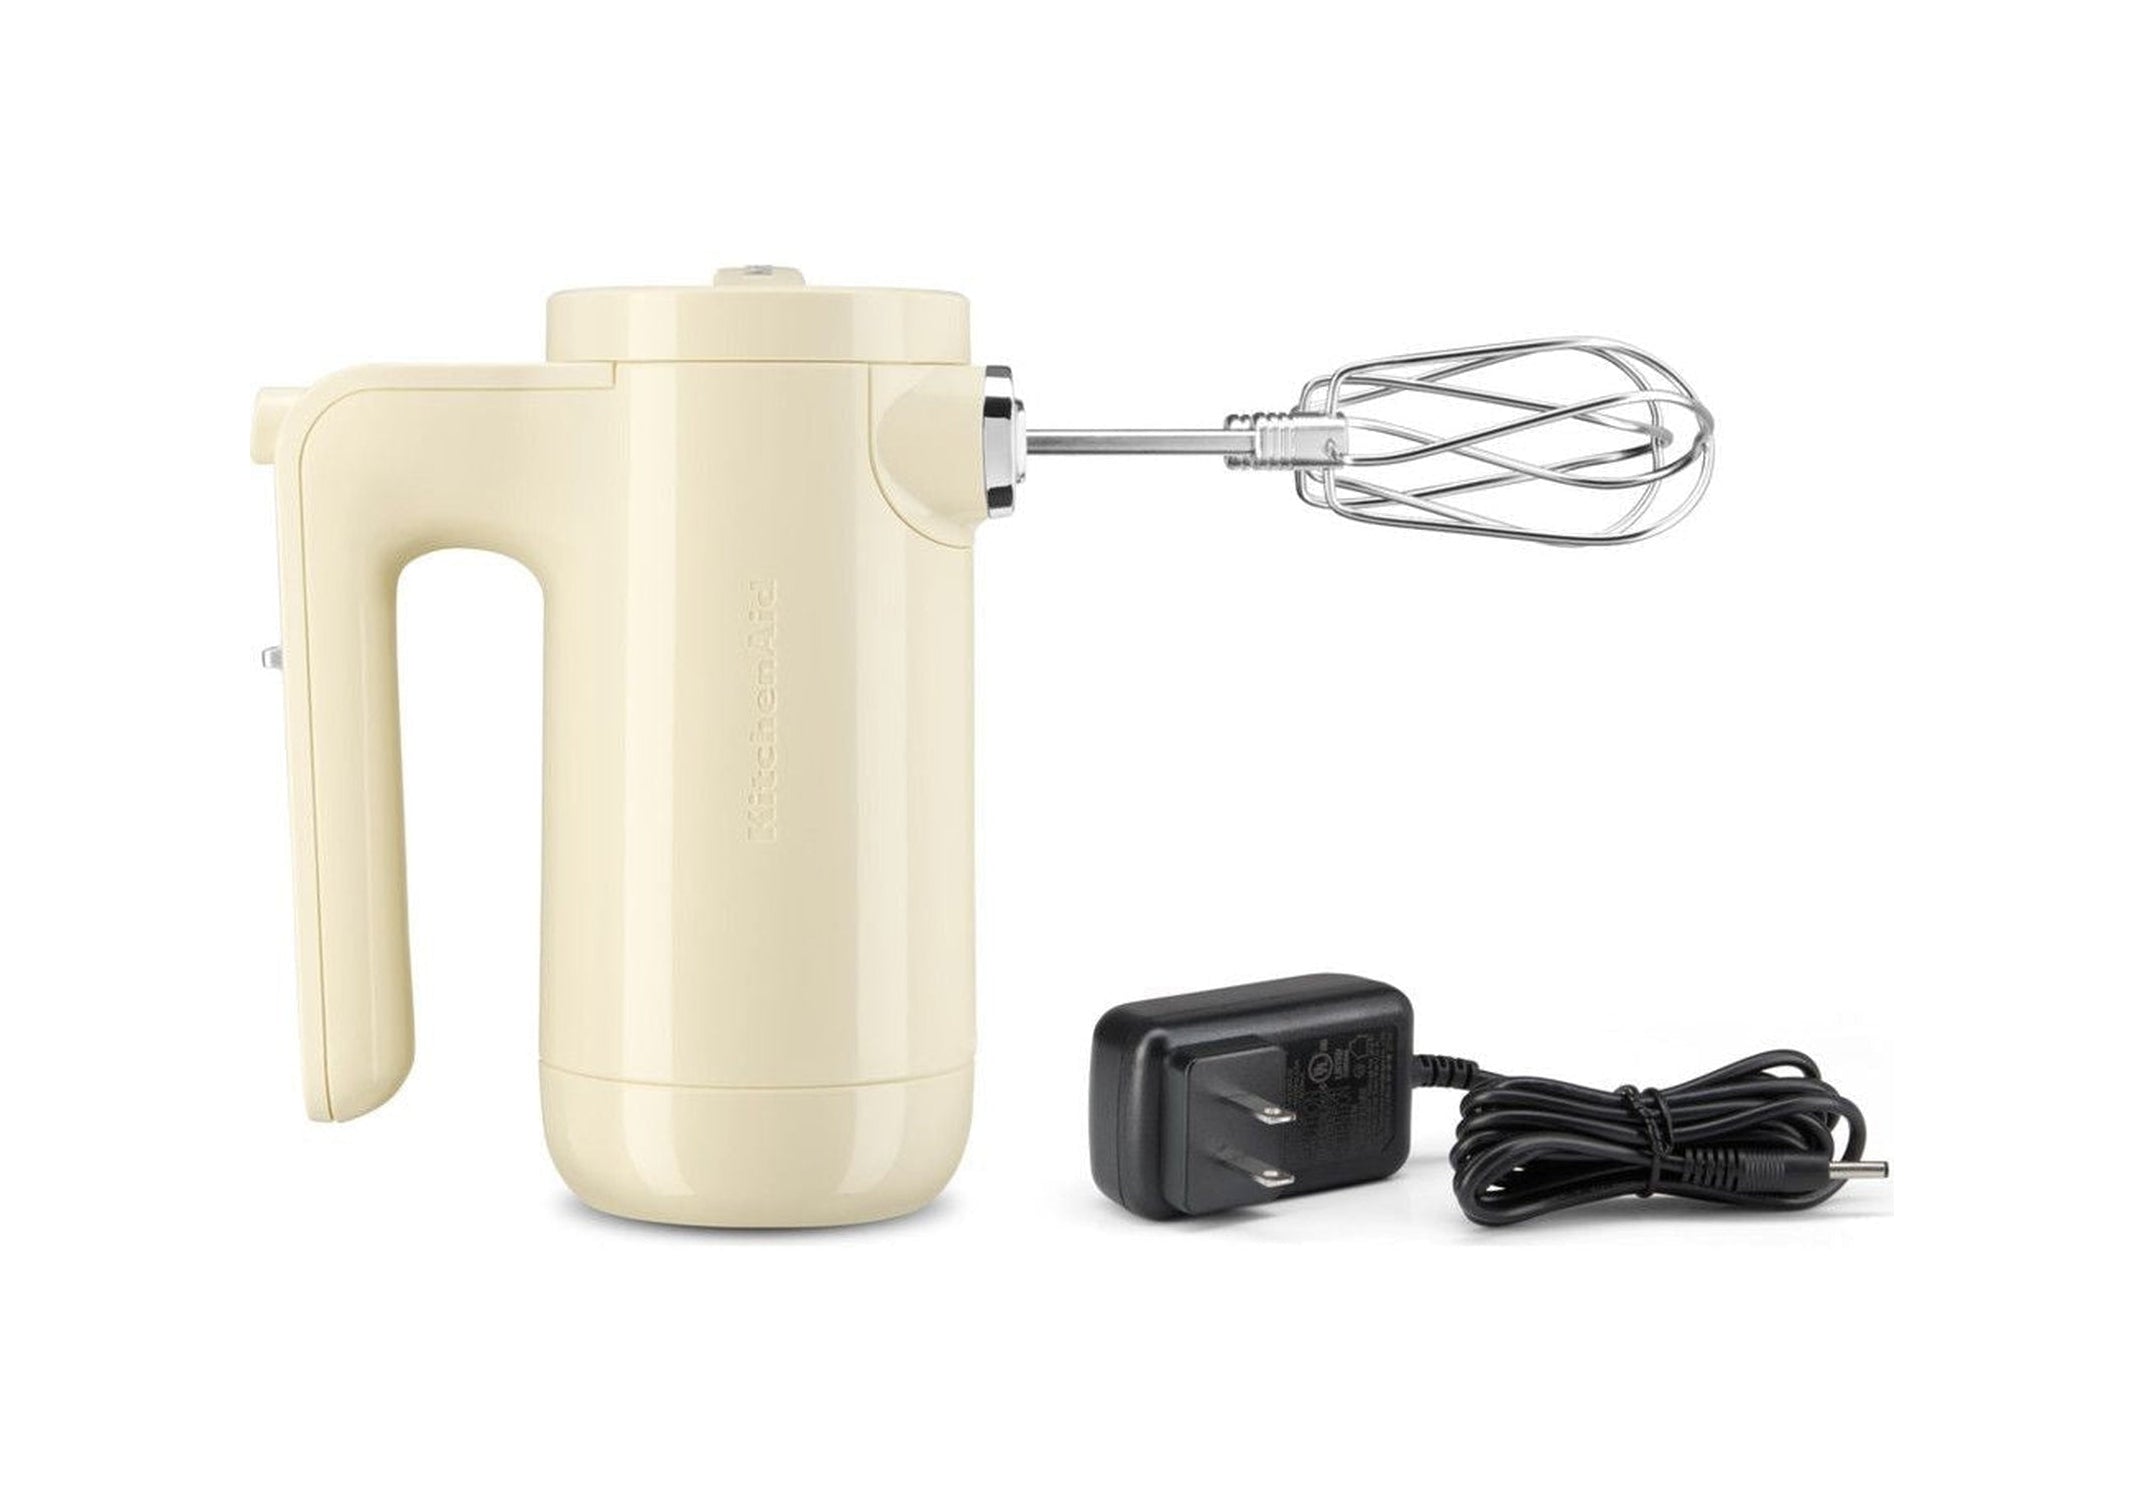 Kitchen Aid 5 Khmb732 Wireless Hand Mixer With 7 Speed Levels, Cream